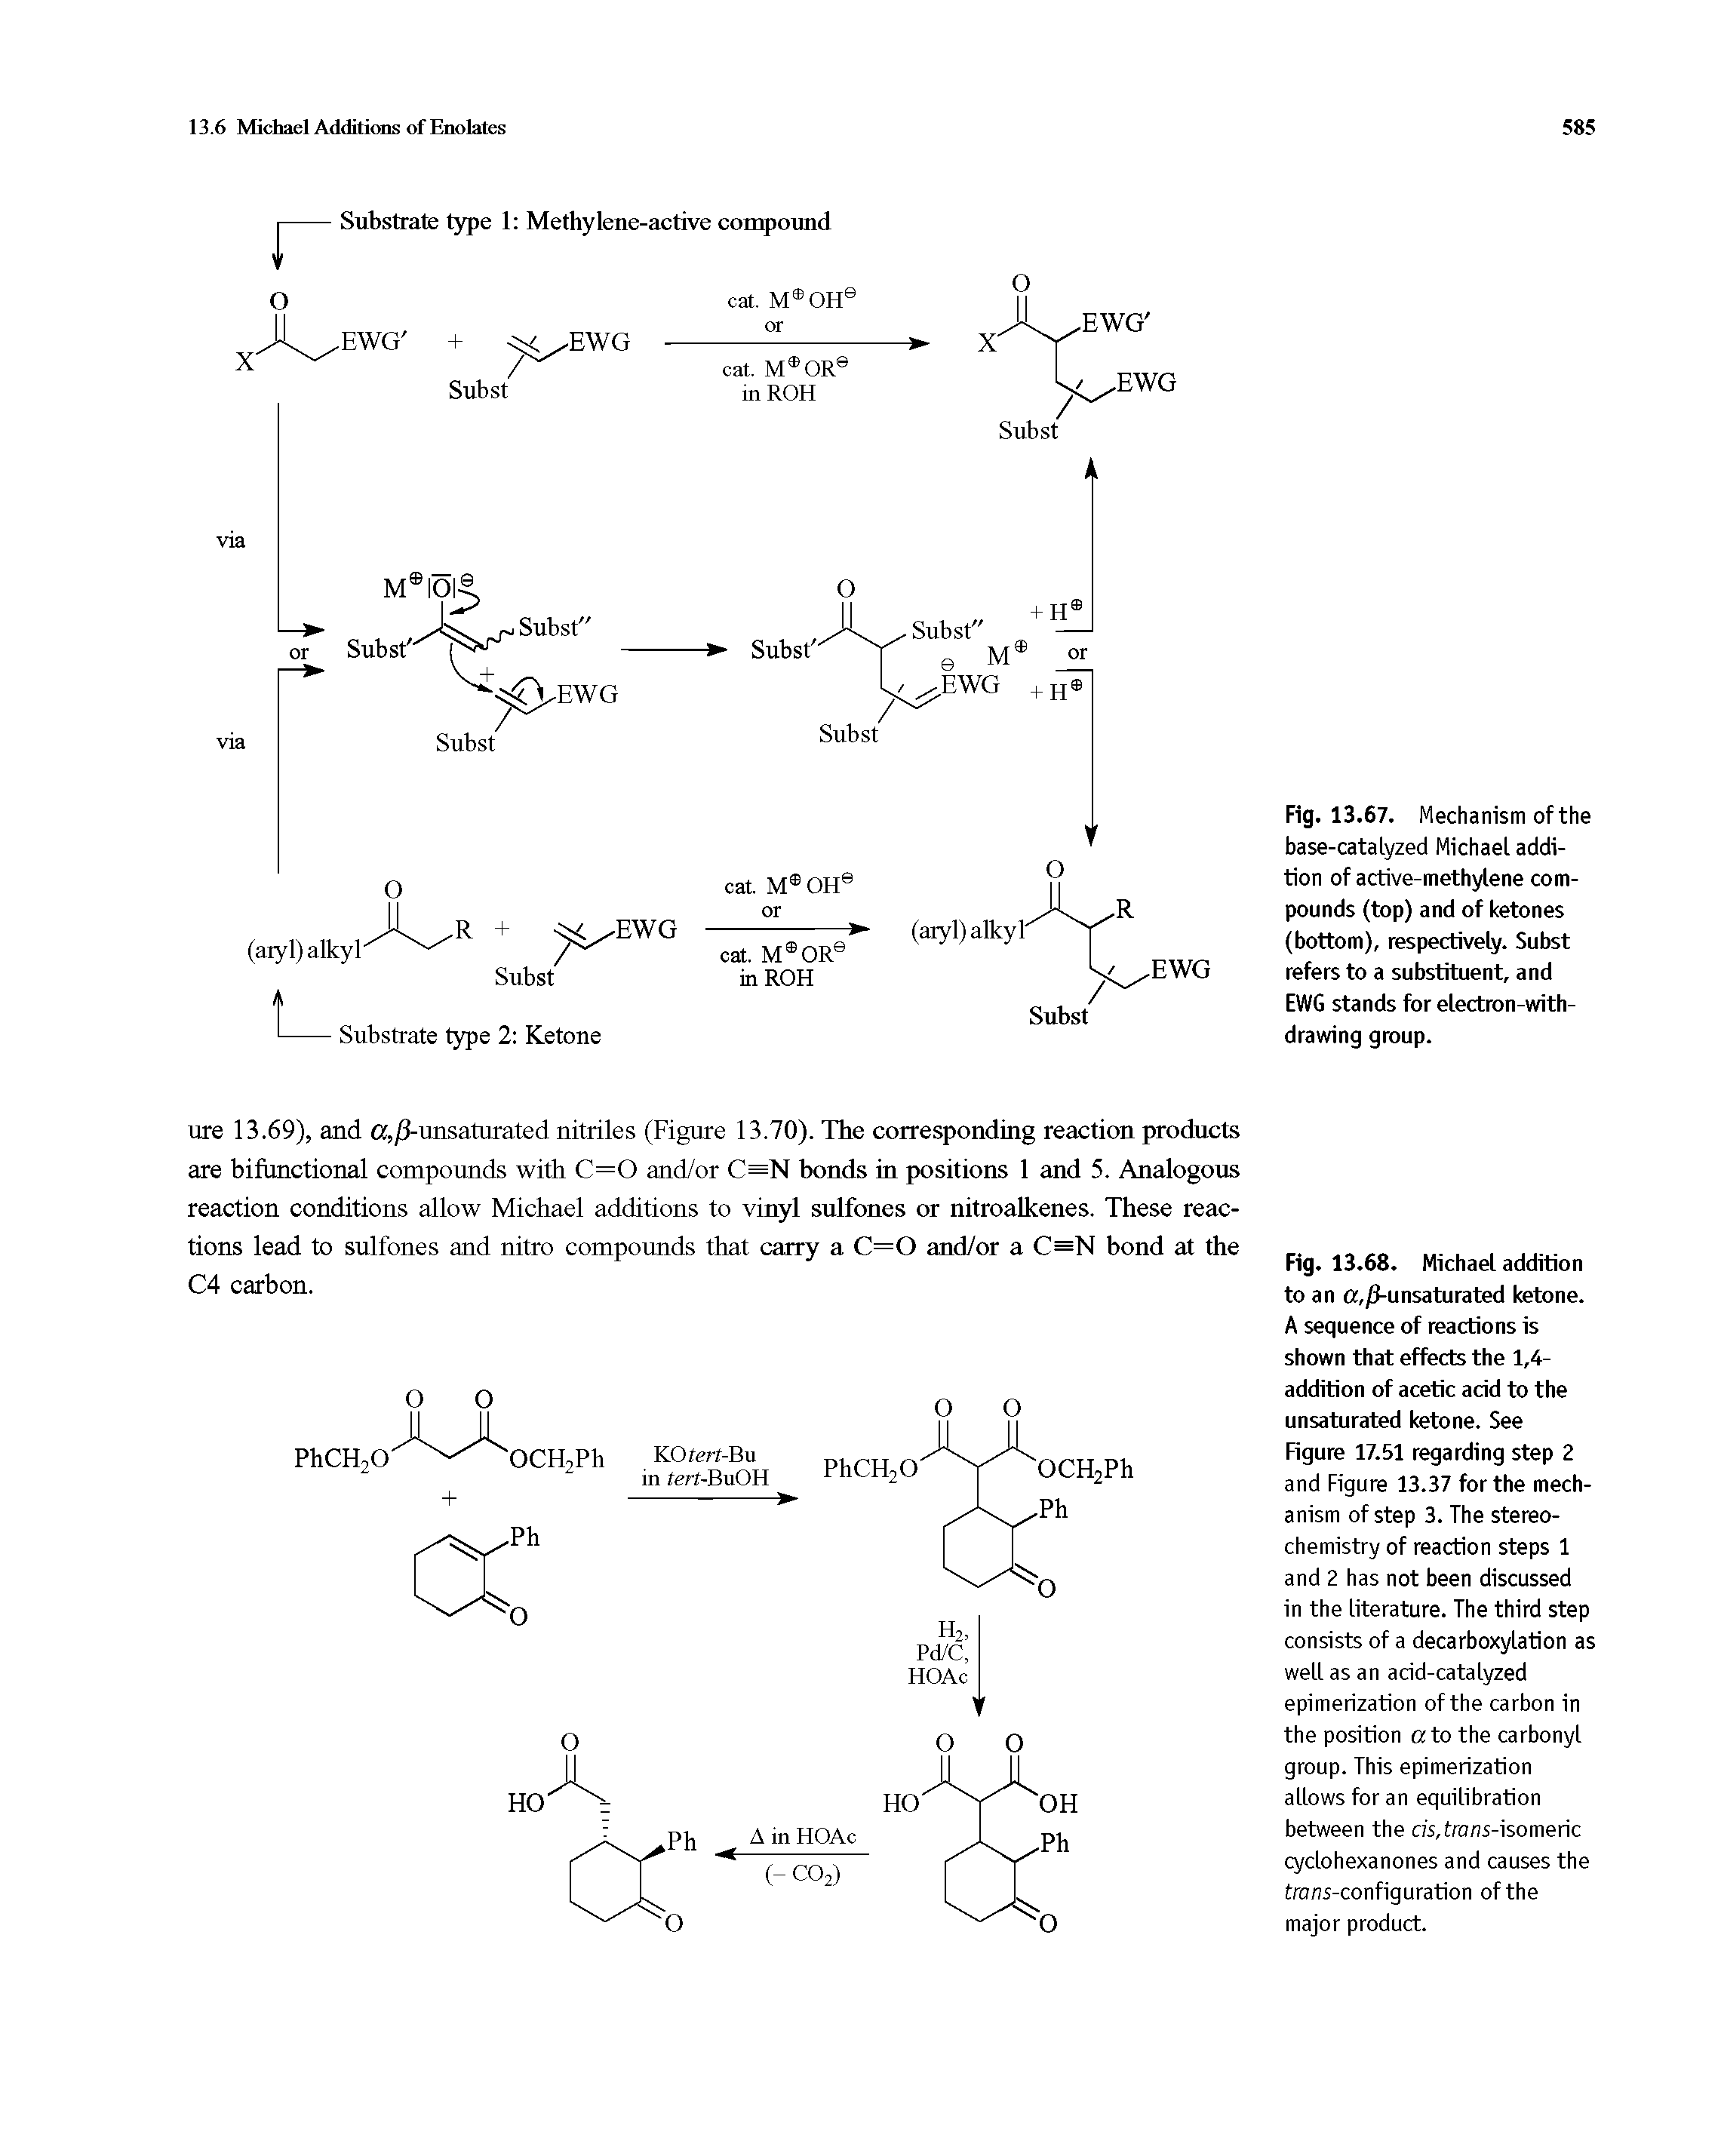 Fig. 13.67. Mechanism of the base-catalyzed Michael addition of active-methylene compounds (top) and of ketones (bottom), respectively. Subst refers to a substituent, and EWG stands for electron-with-drawing group.